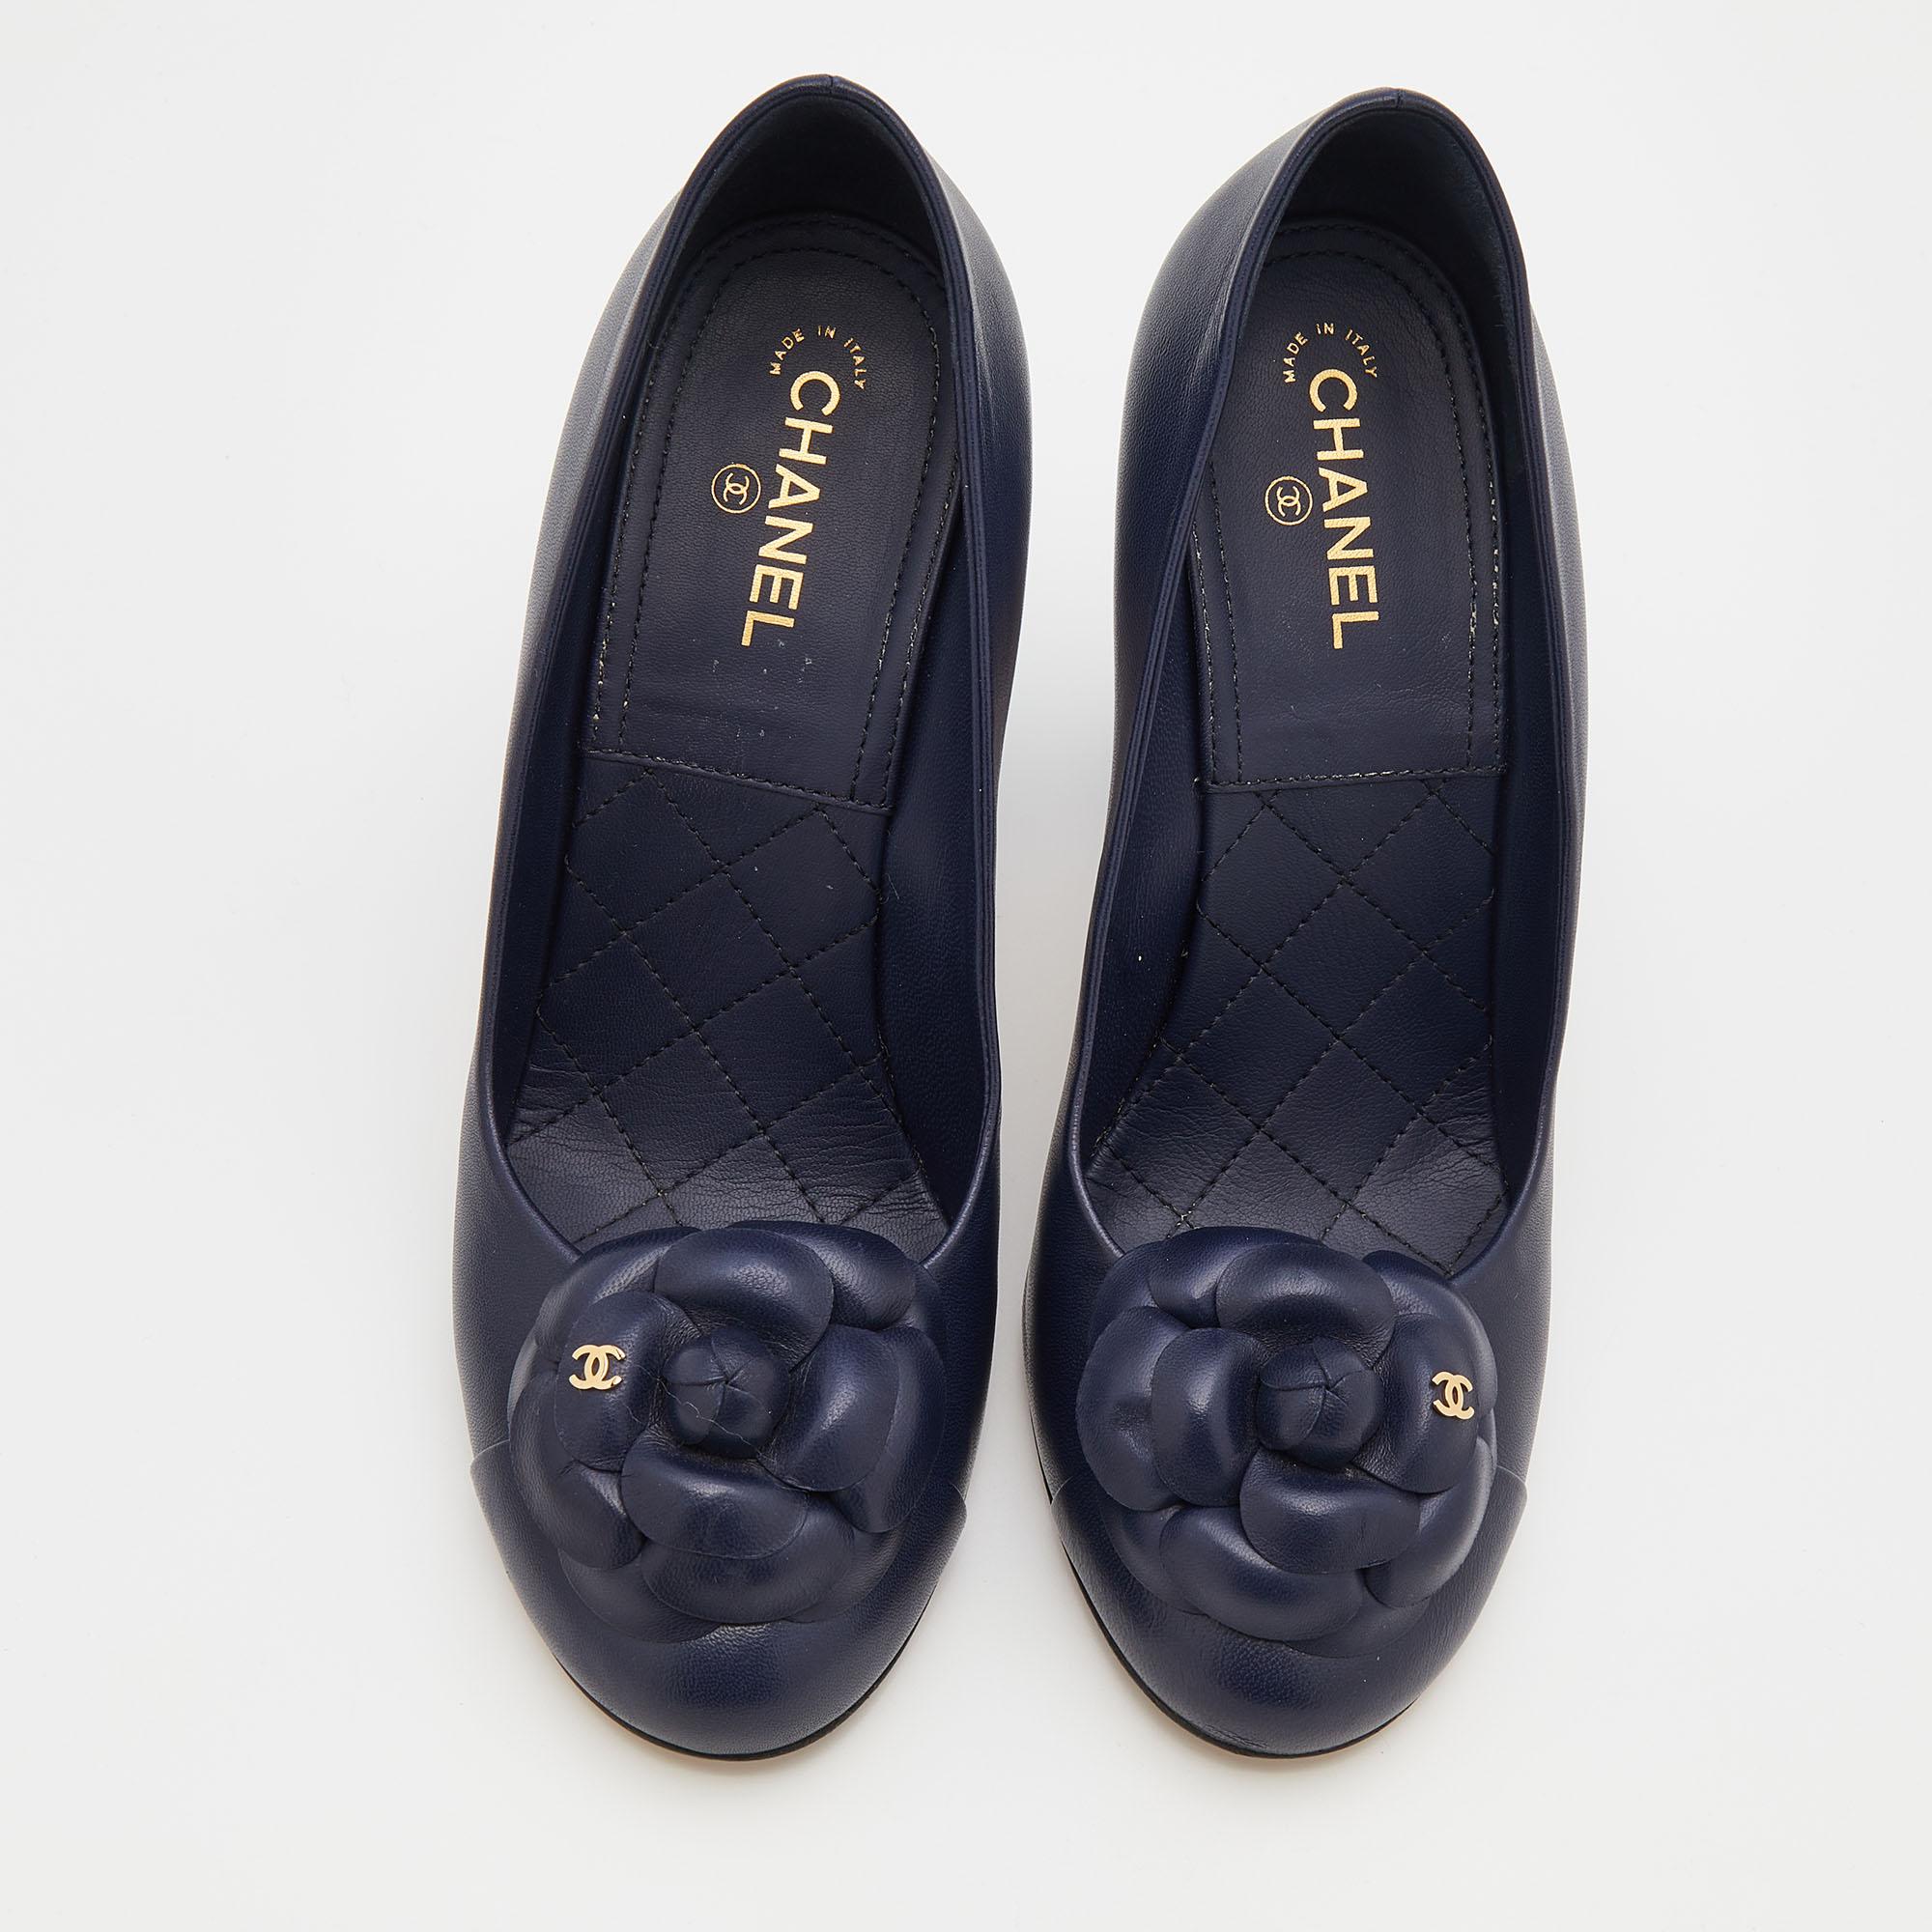 The 11cm heels of this pair of Chanel pumps will offer you elegant steps. Crafted from navy blue leather, its toe is decorated with a Camellia motif, and it embodies a faultless construction.

Includes: Receipt, Info Booklet, Original Box, Original